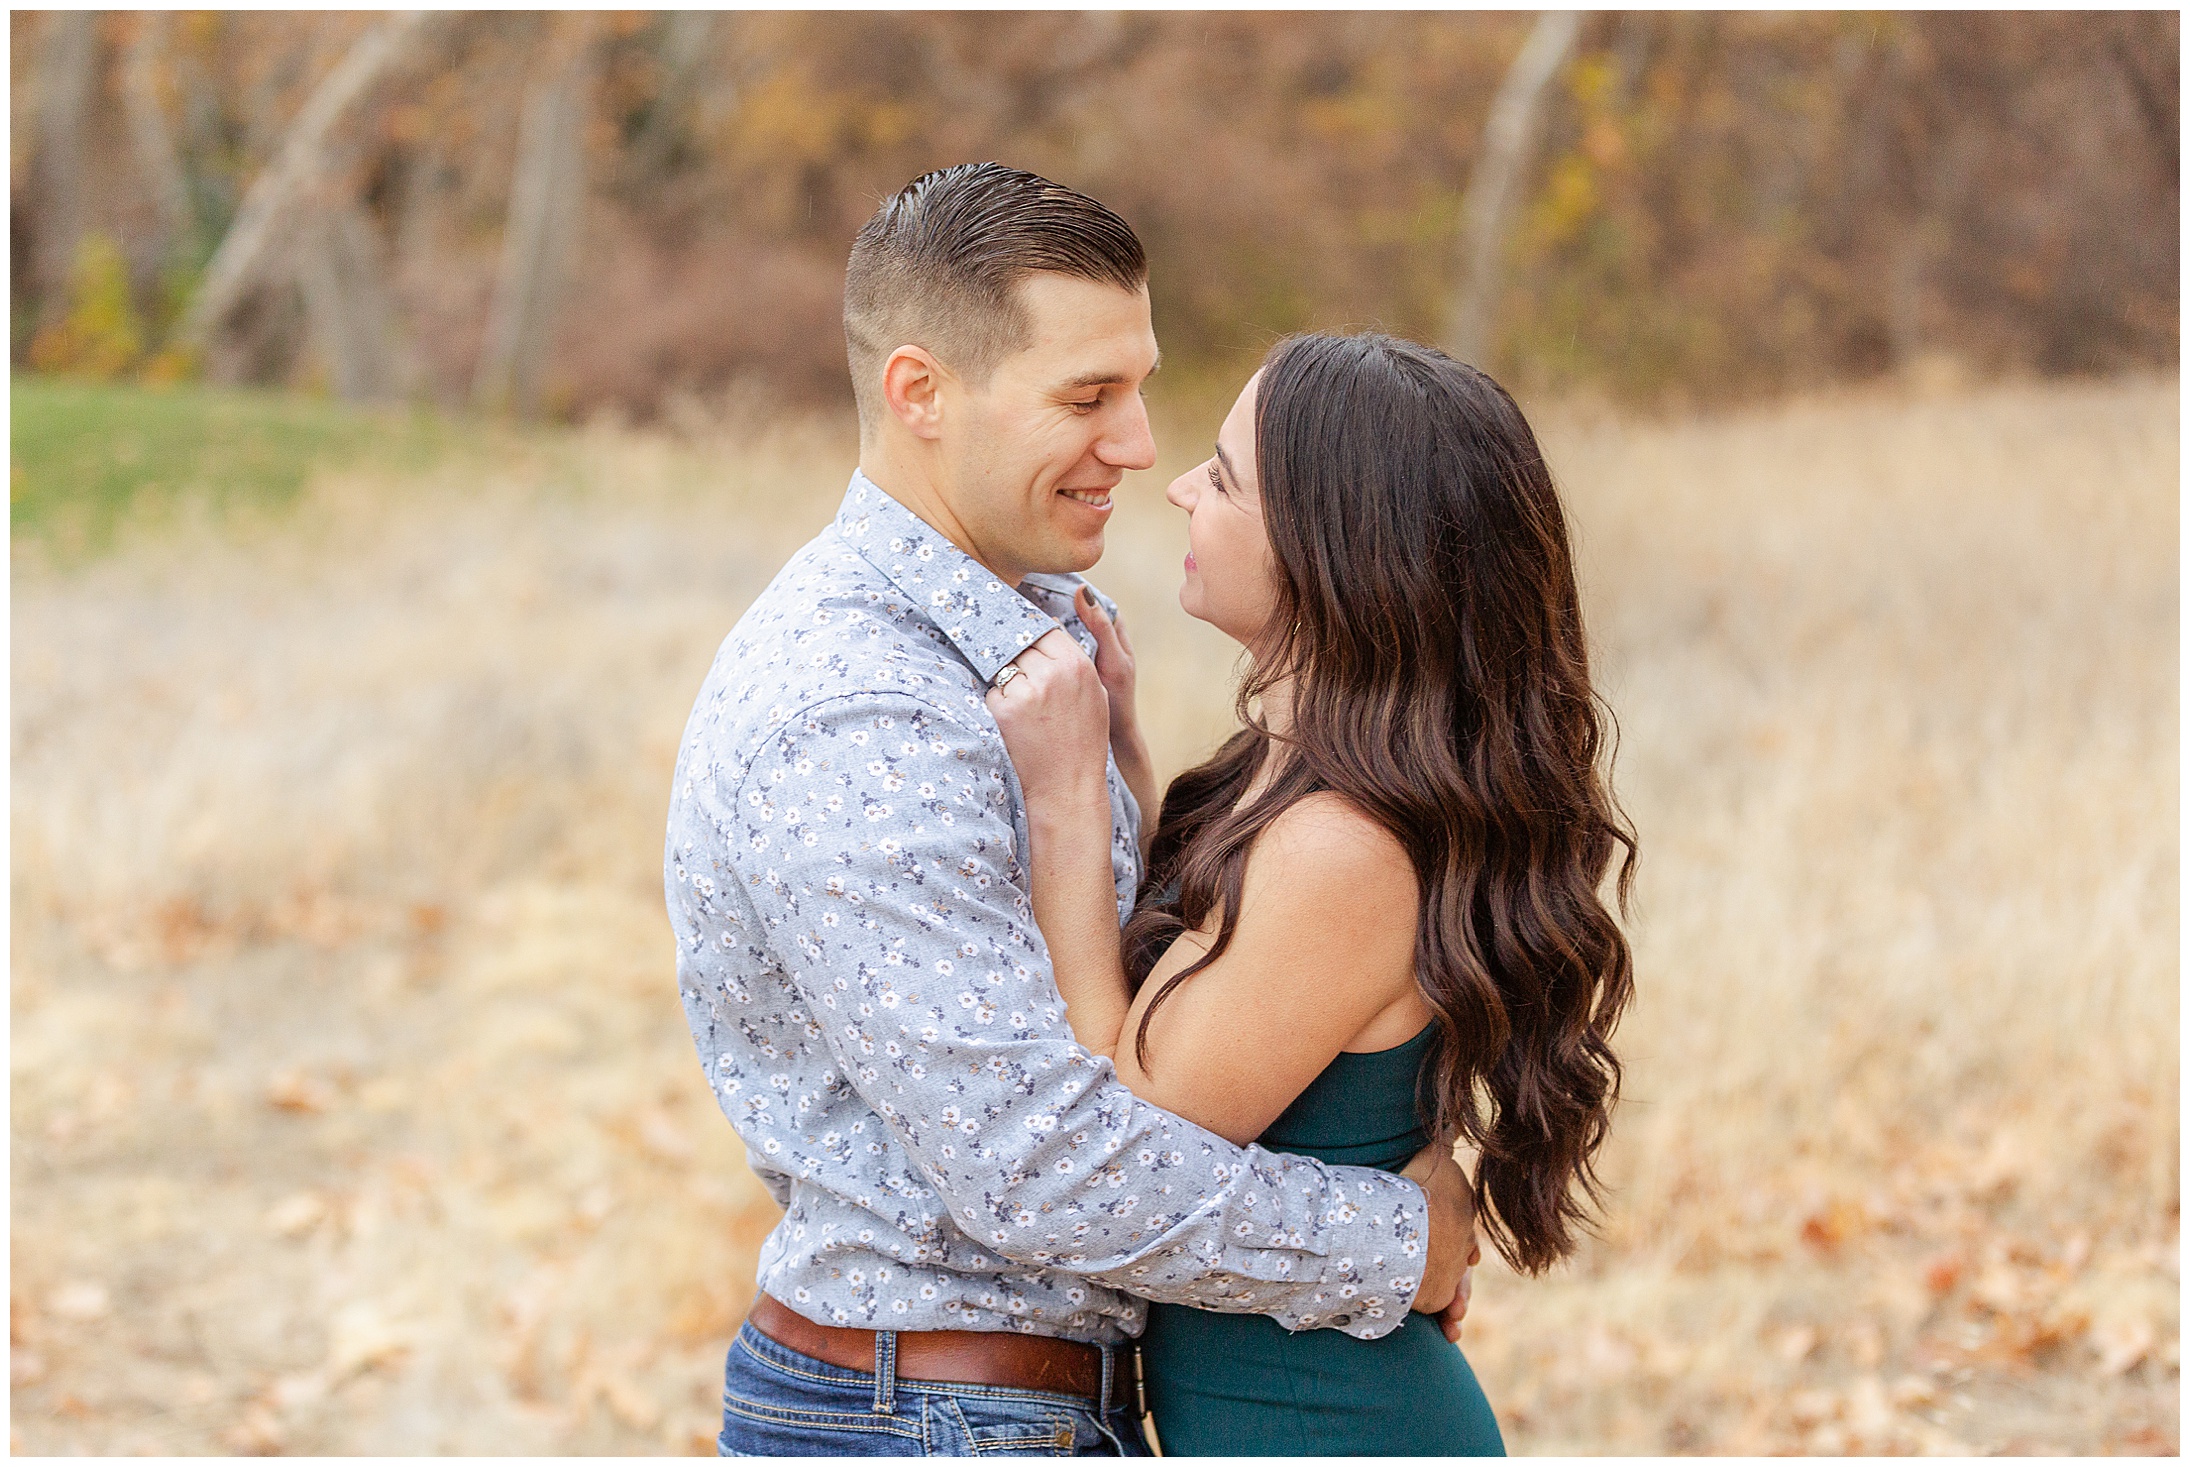 Bidwell Park Golf Course Engagement Session Winter Fall December Dog Champagne Orange Rust Teal,